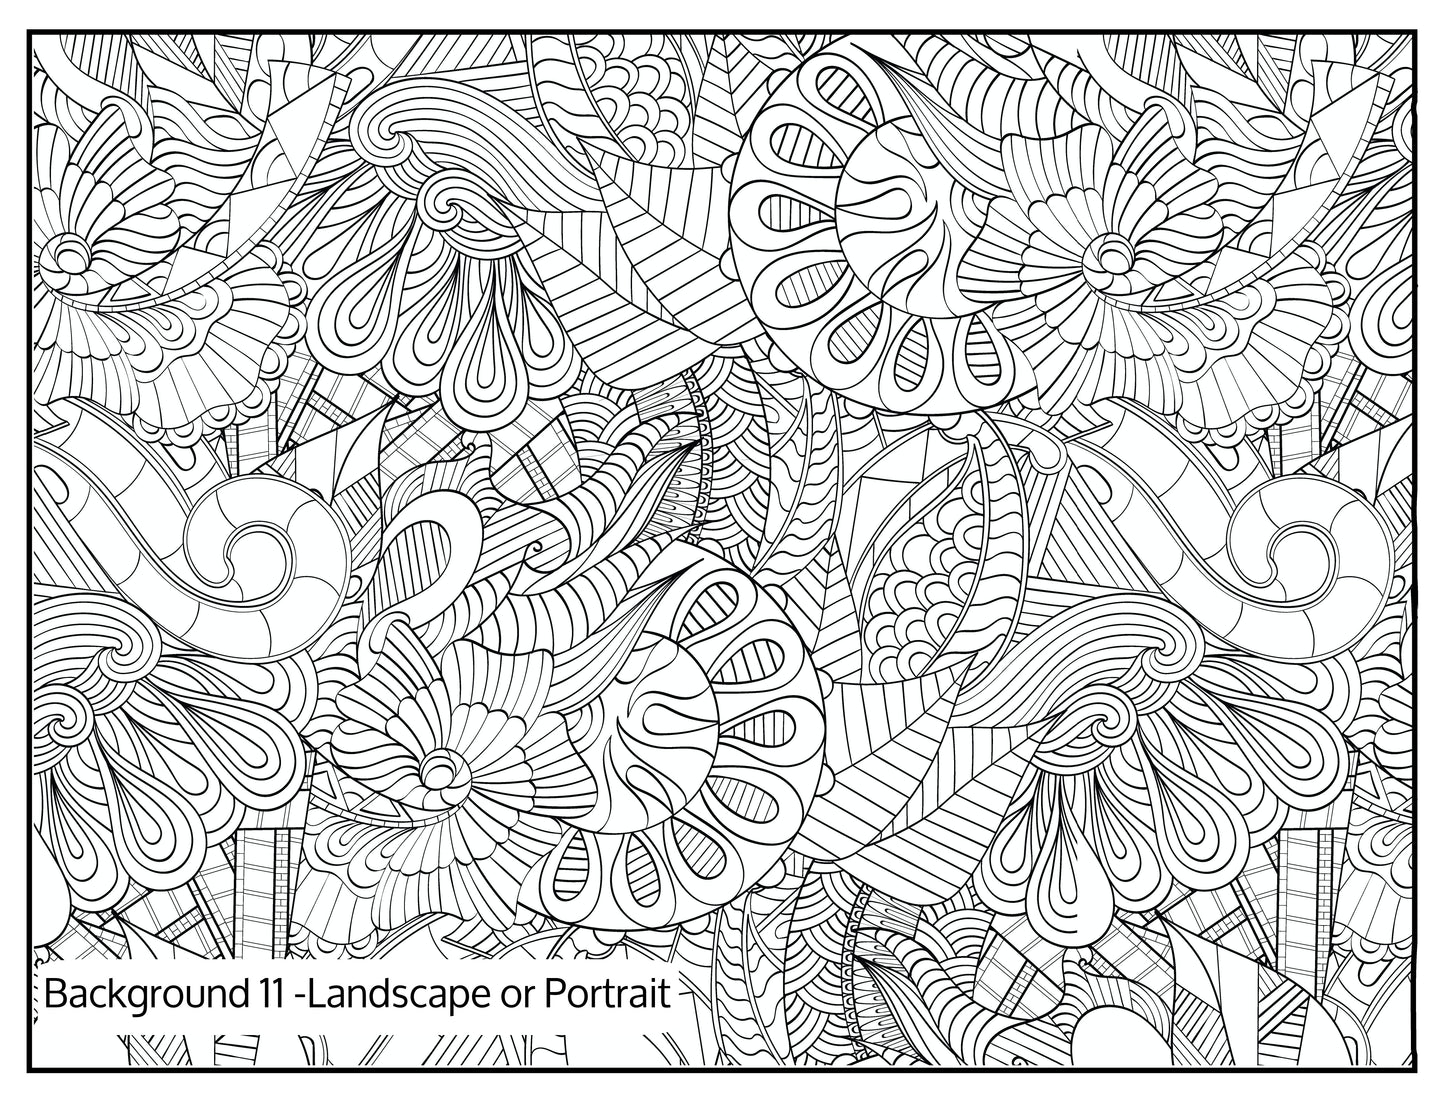 Background 11 Custom Personalized Giant Coloring Poster 46"x60"